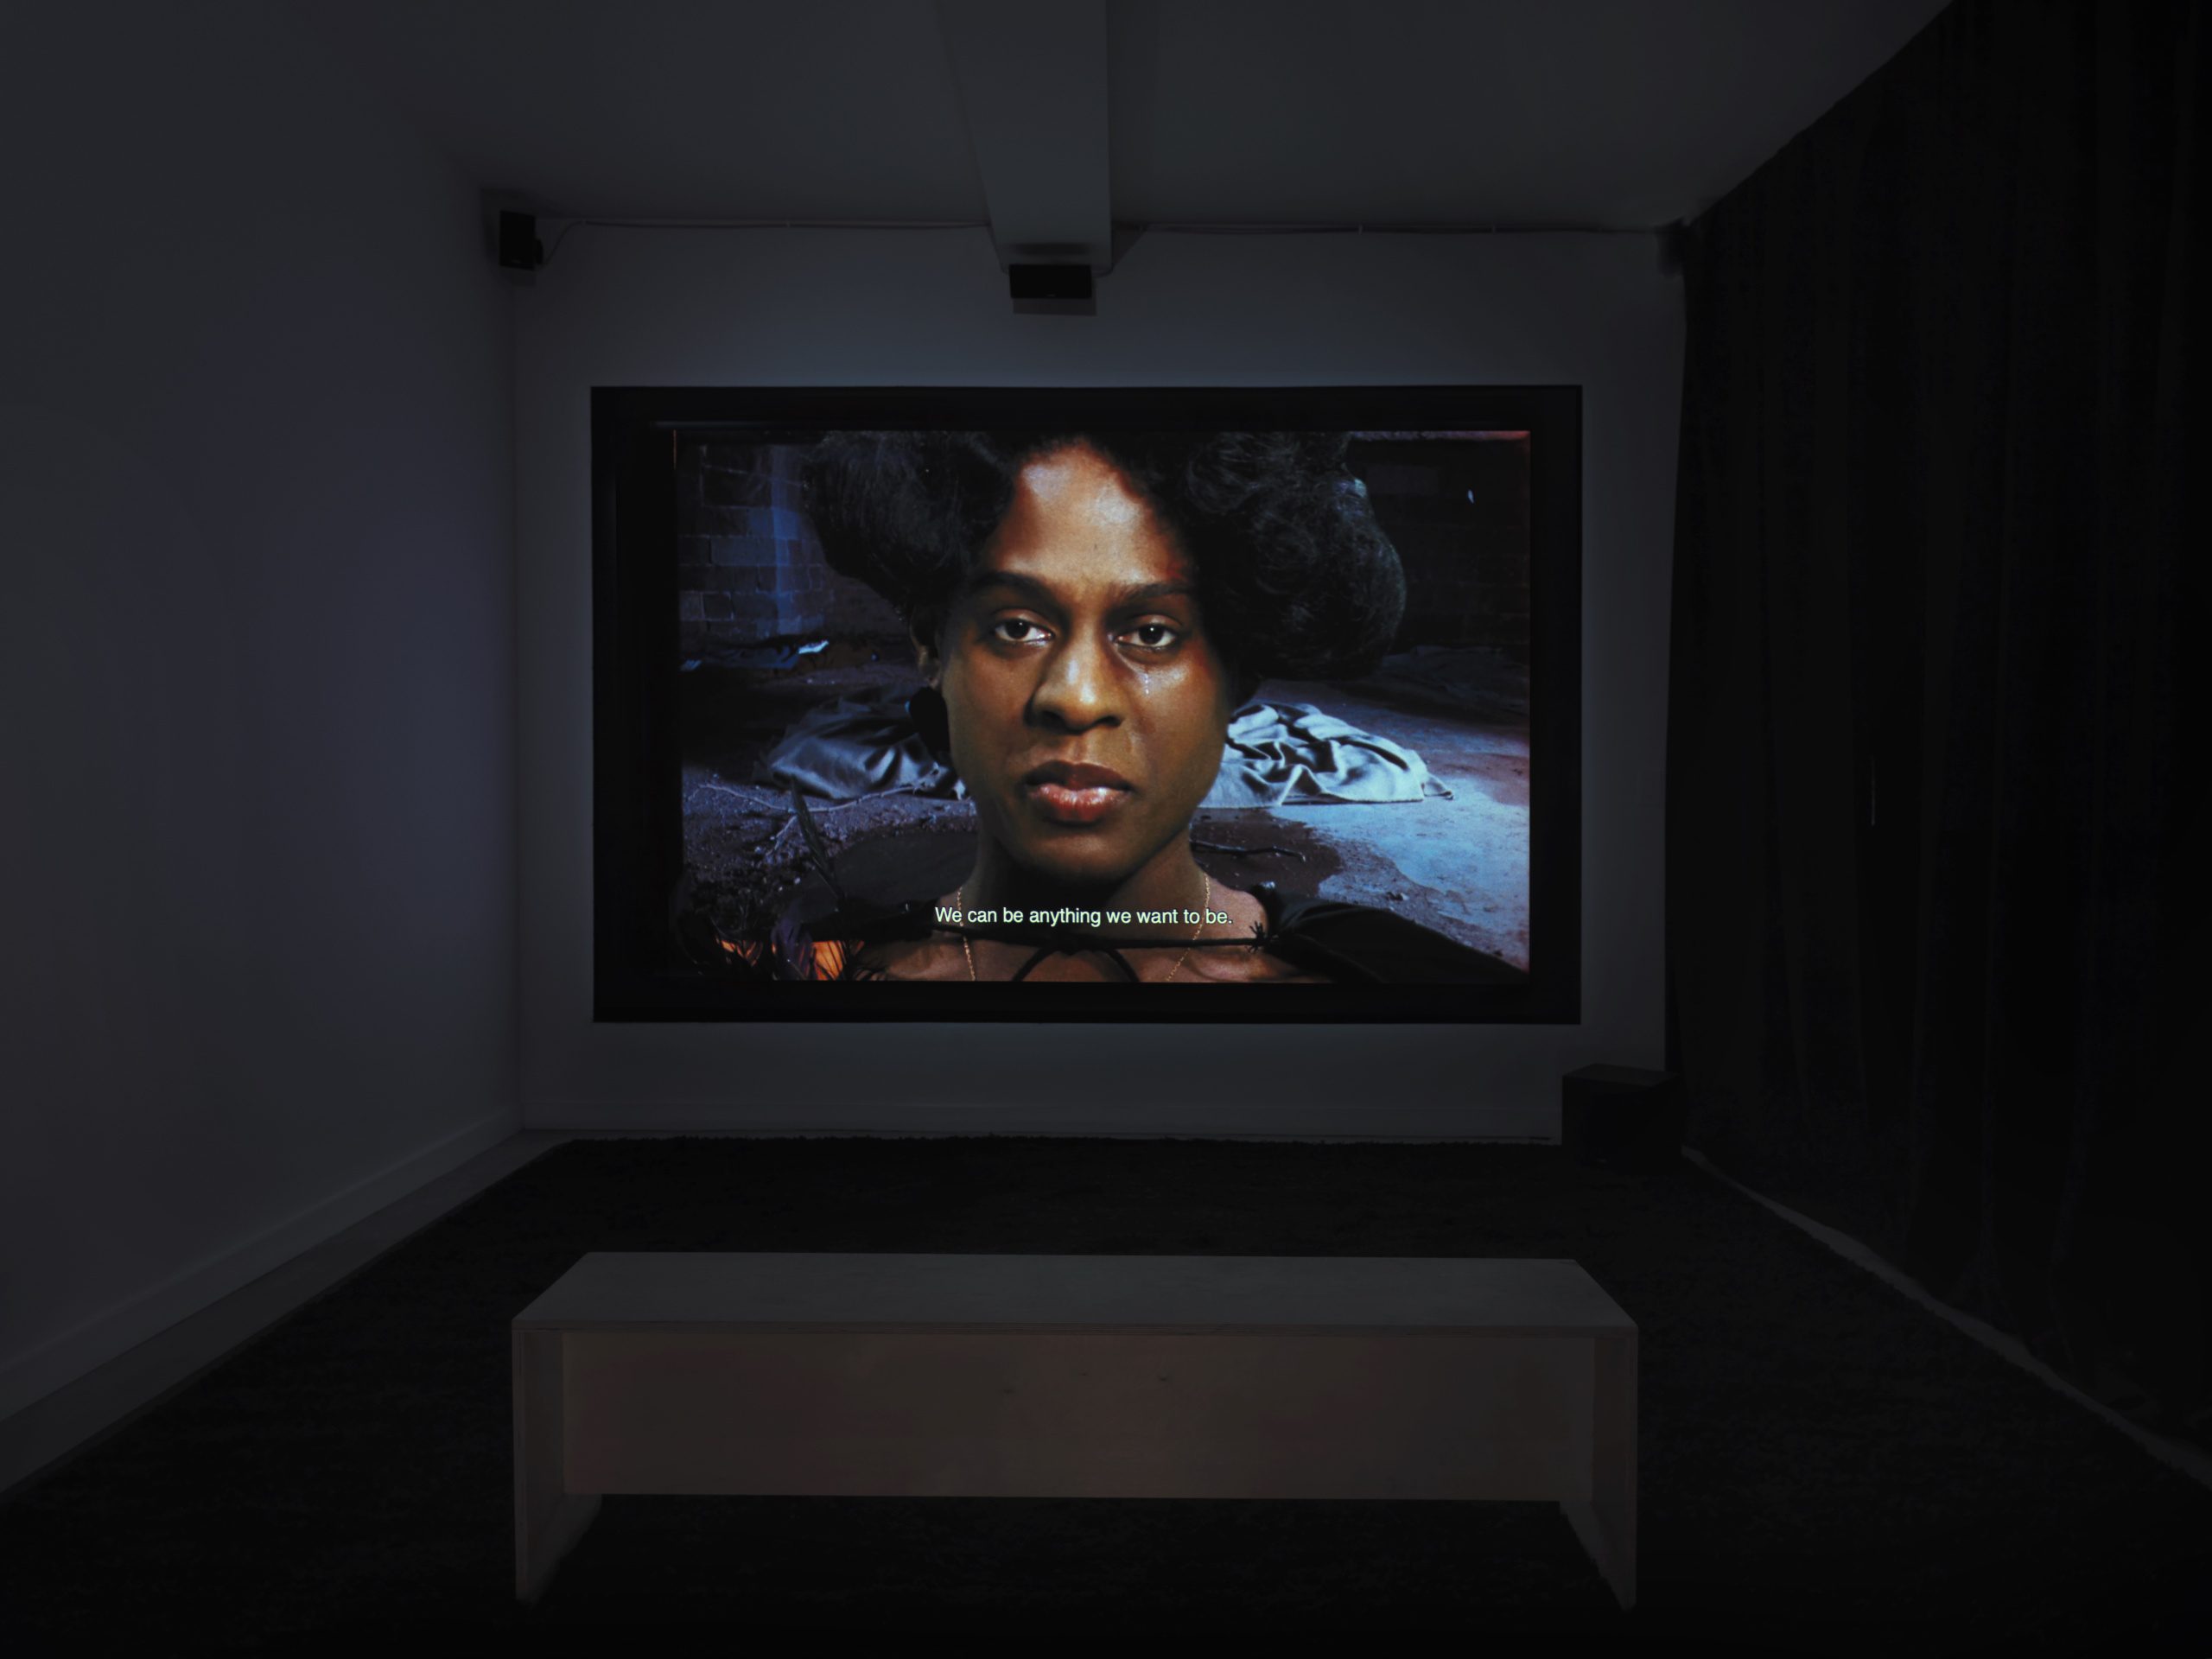 Photograph of a screening room with an image on screen of a close up face of a person with a tear falling from one eye, looking directly outward.